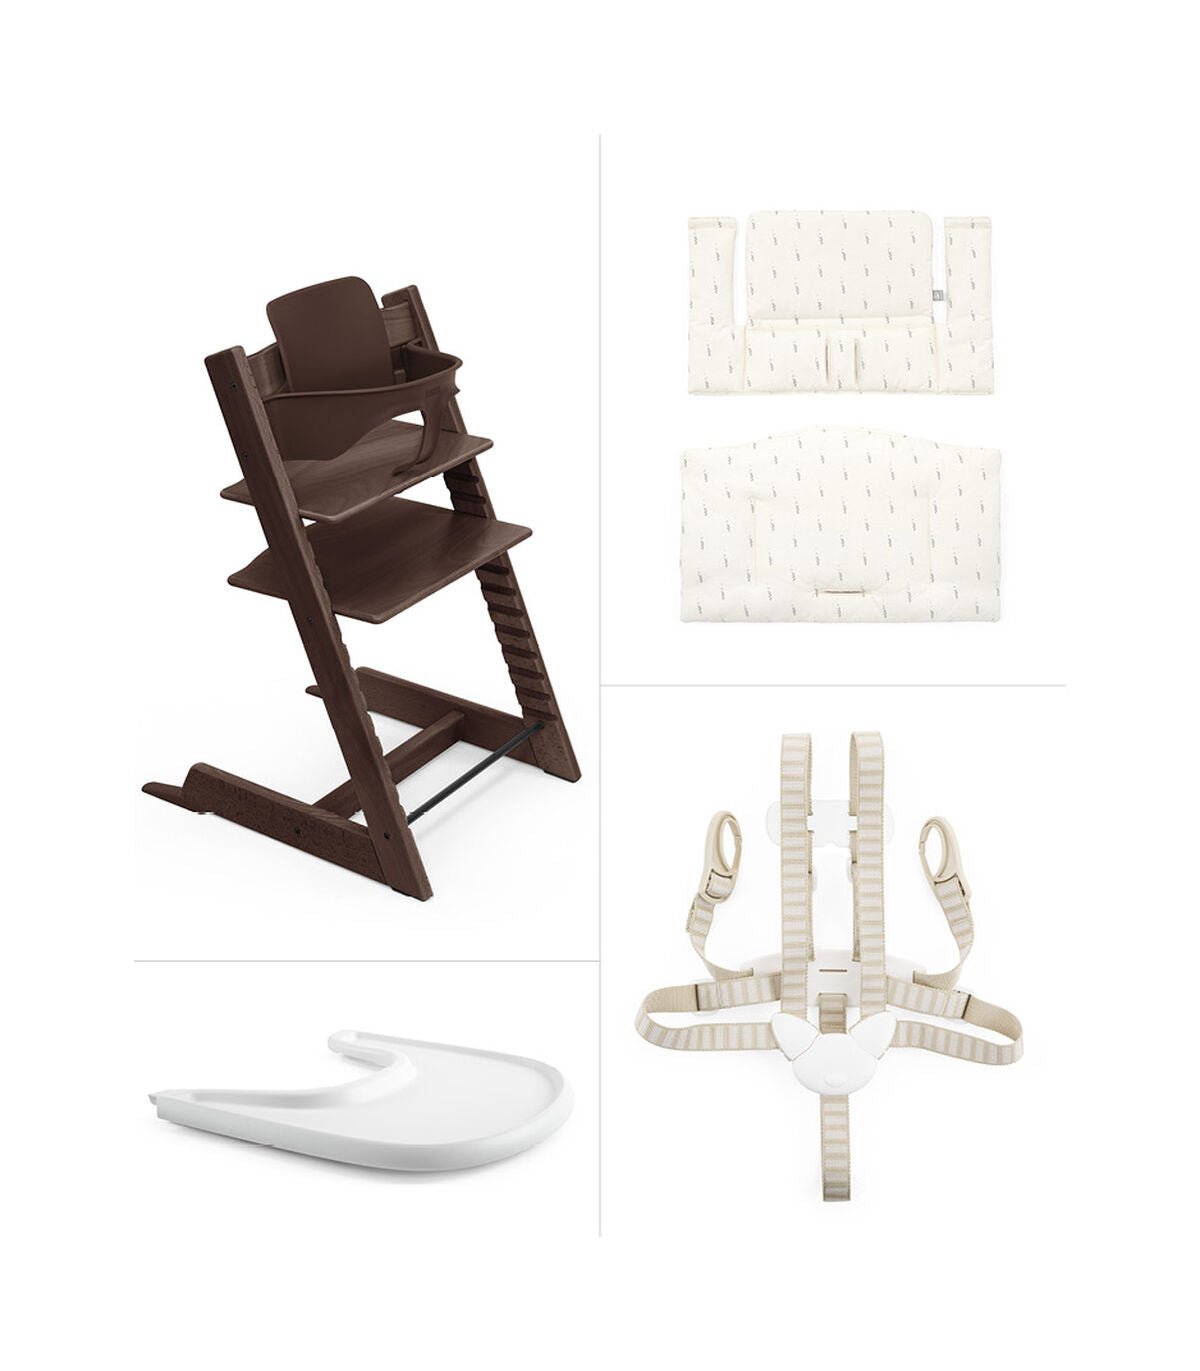 Stokke Tripp Trapp High Chair Complete With Cushion And Tray - ANB Baby -7040356388004$300 - $500